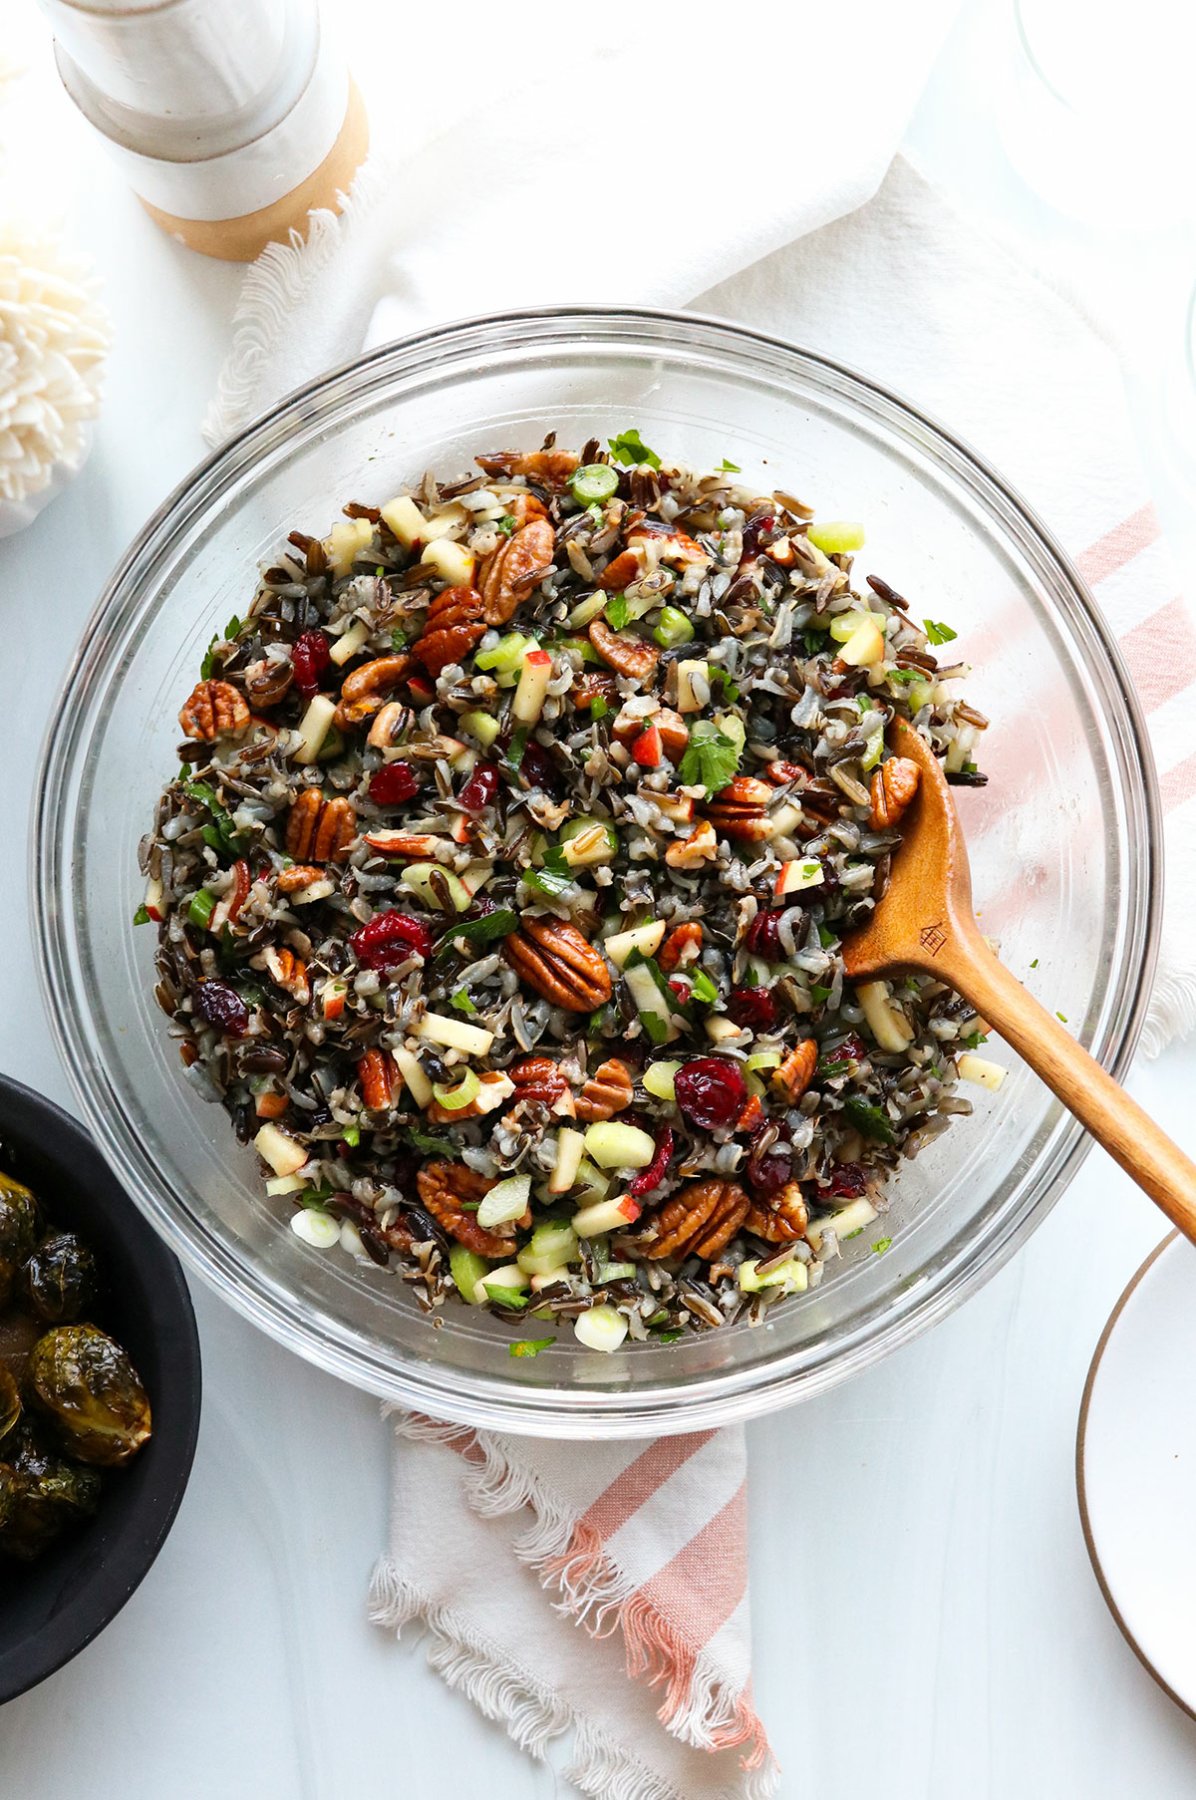 Wild rice salad overhead in a glass bowl on a striped towel.